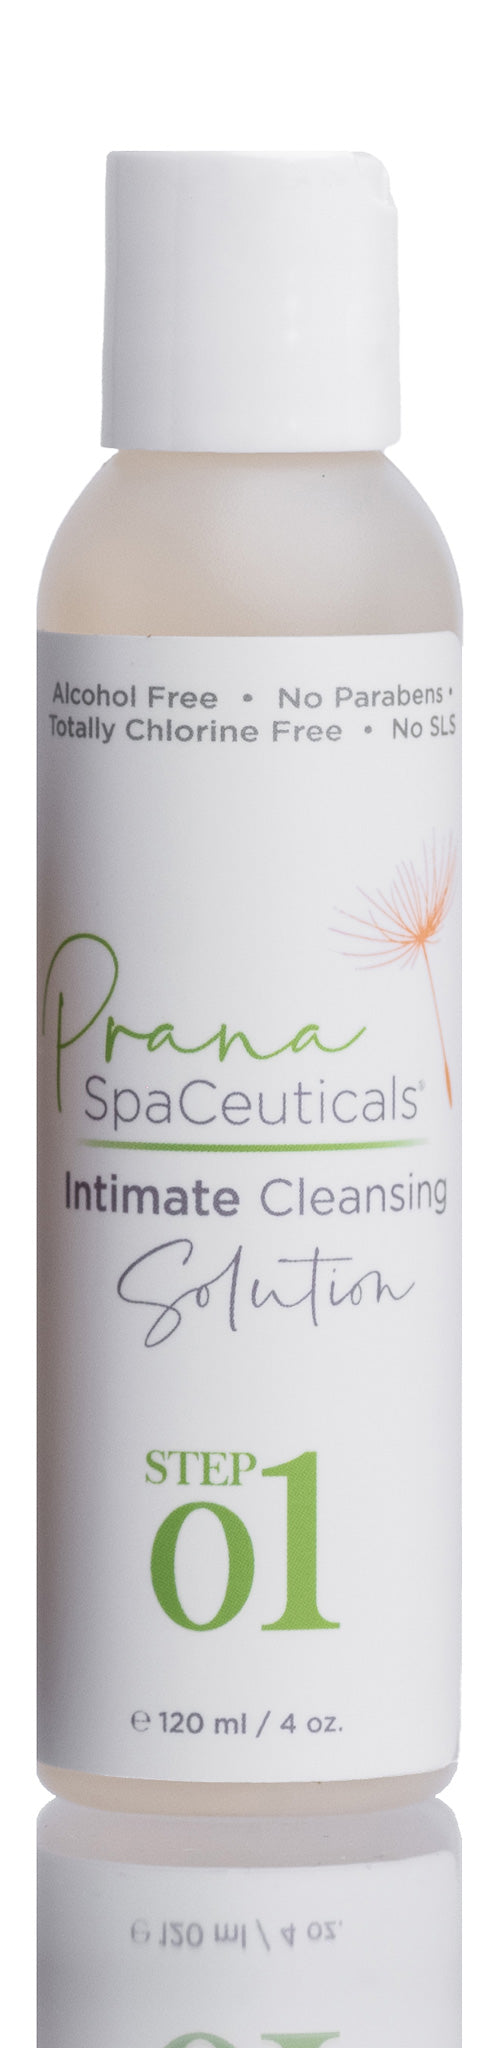 Intimate Cleansing Solution